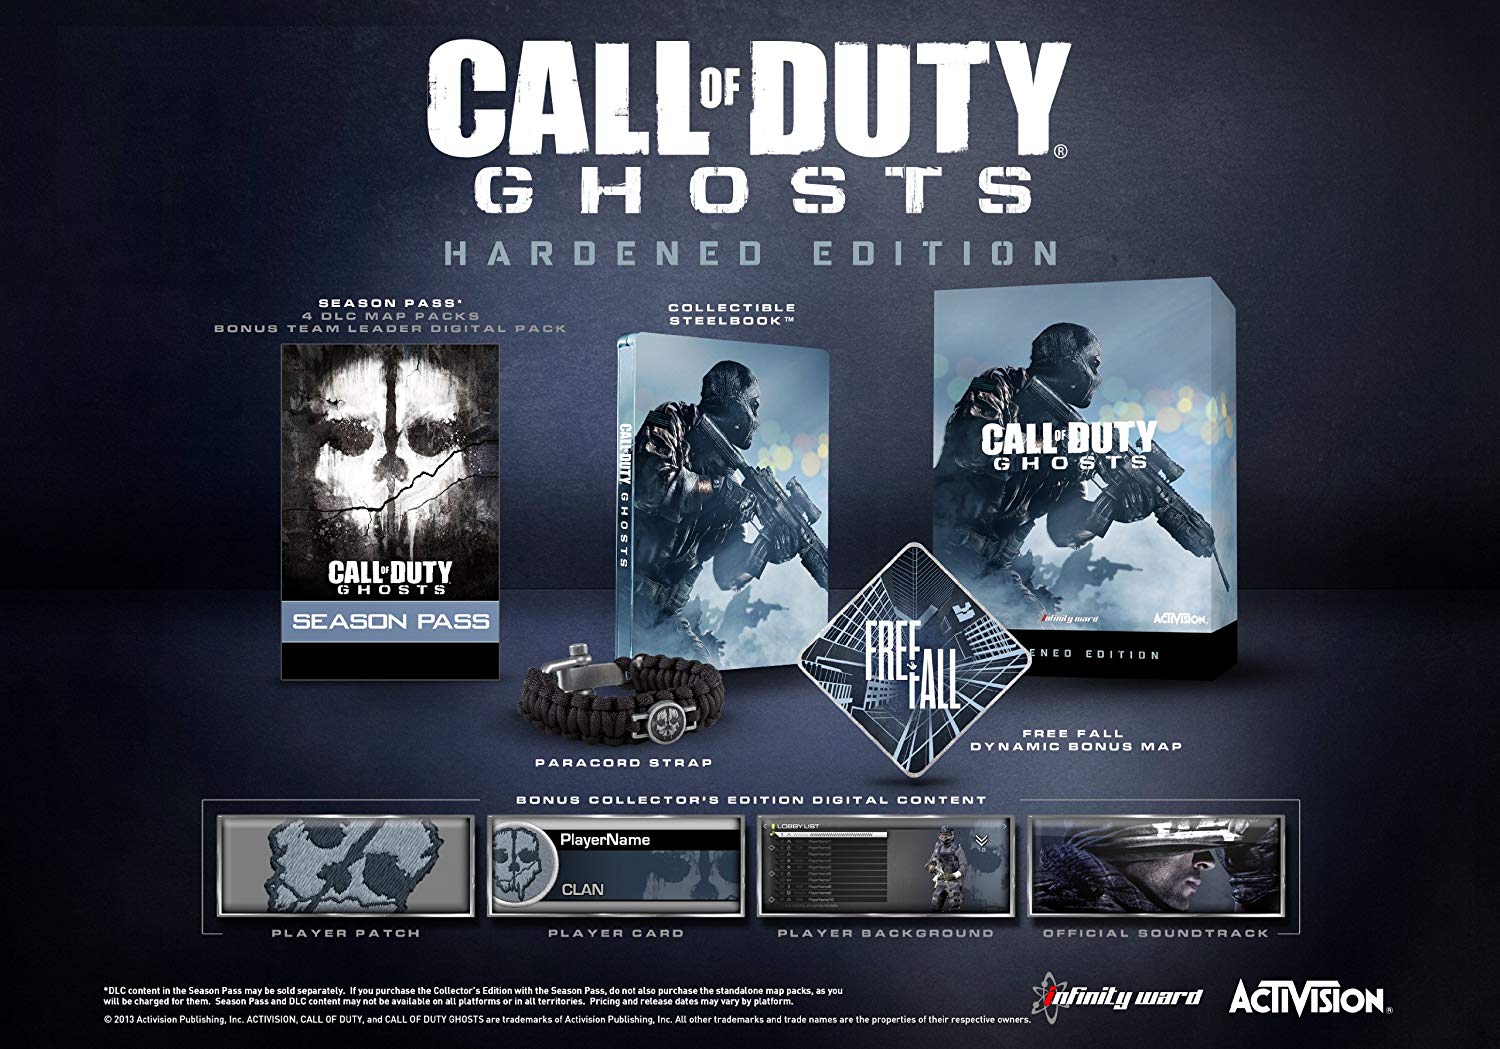 CALL OF DUTY: GHOSTS HARDENED EDITION